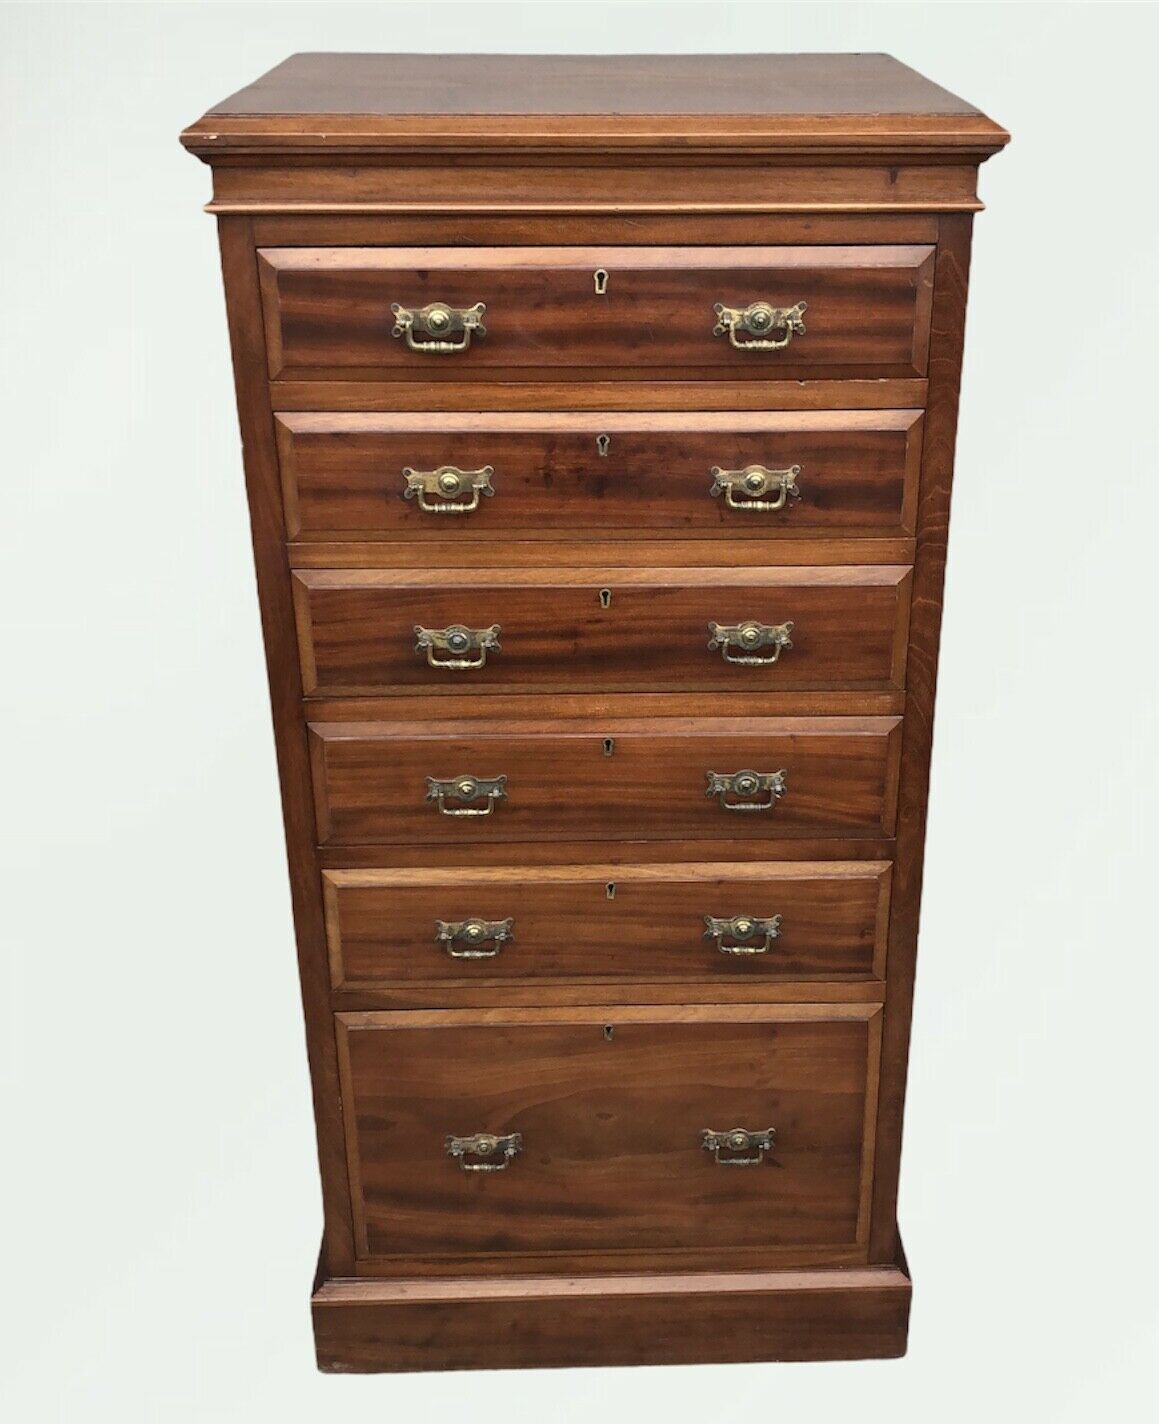 Handsome Antique Solid Walnut Tallboy Chest Of Drawers ( SOLD )